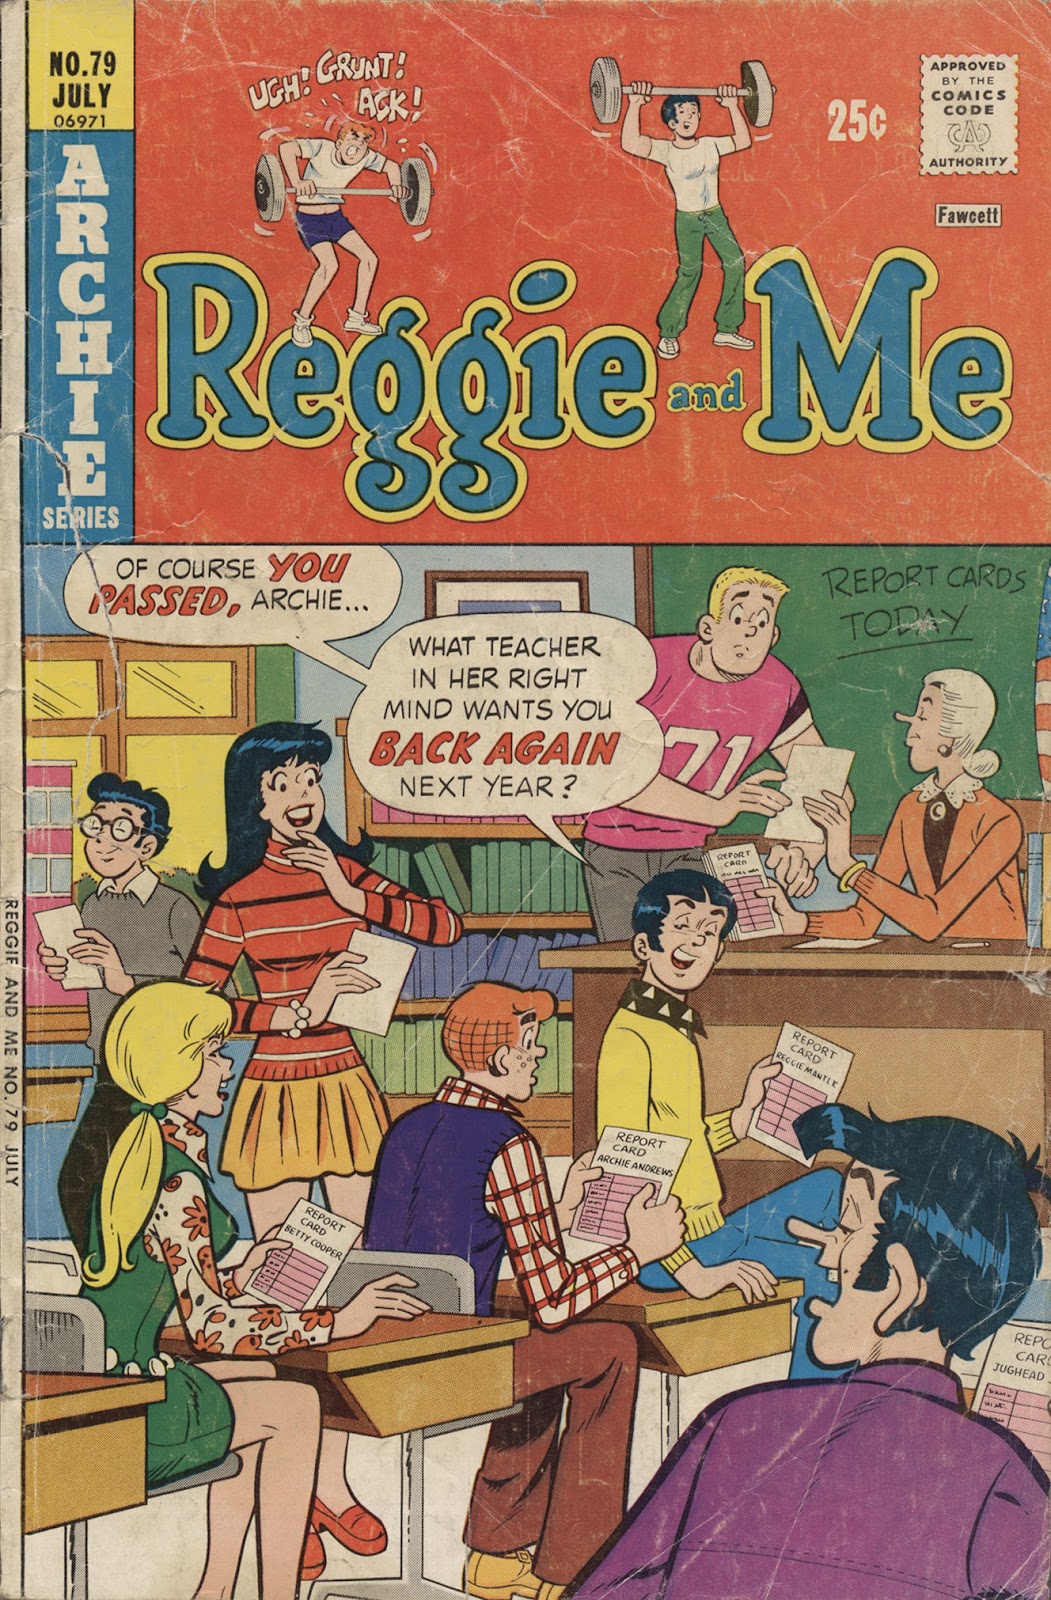 Reggie and Me (1966) 79 Page 1